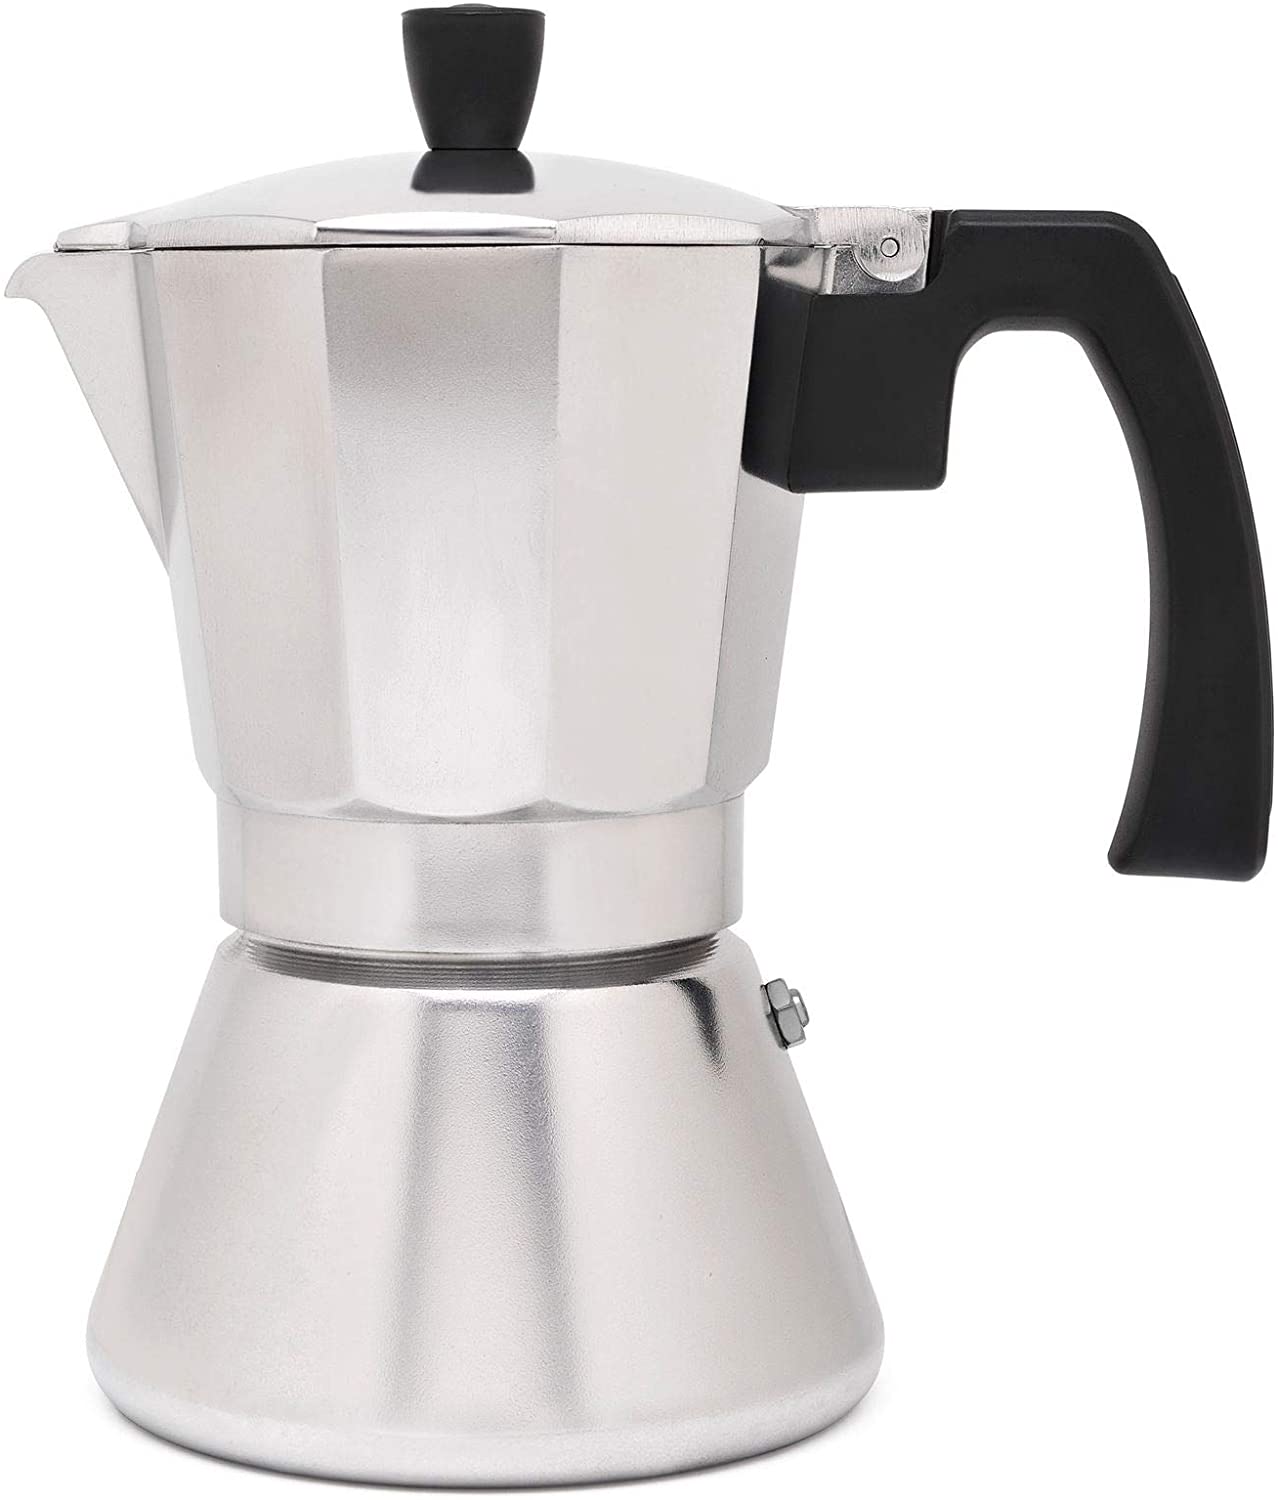 Leopold Vienna Silver stainless steel espresso maker induction for 6 cups